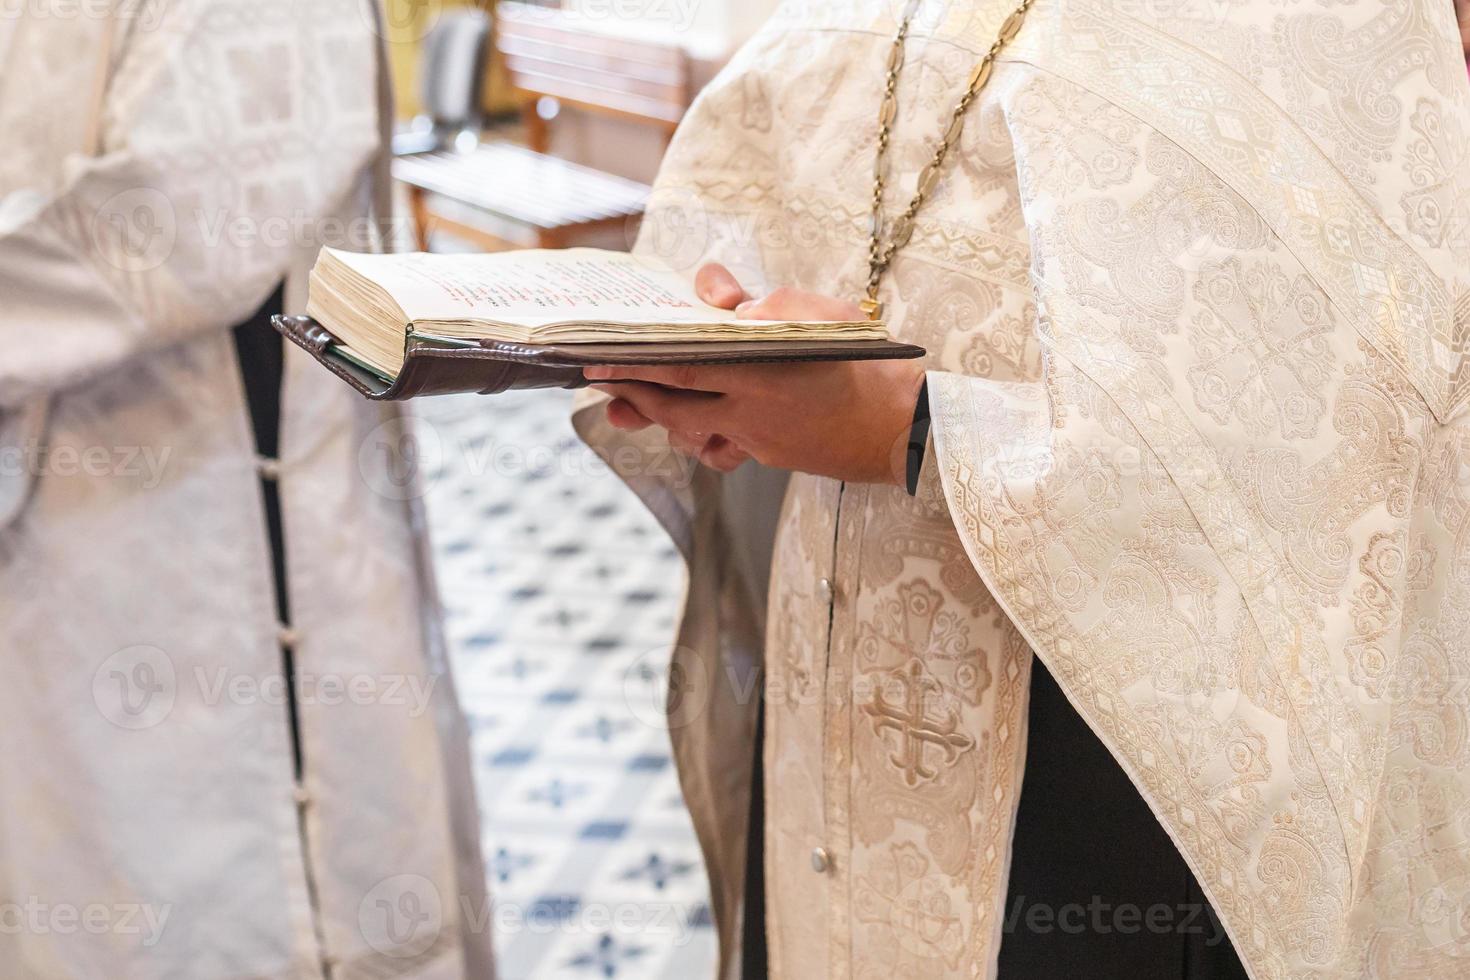 priest in an Orthodox church reads a prayer from the Bible during a worship service photo